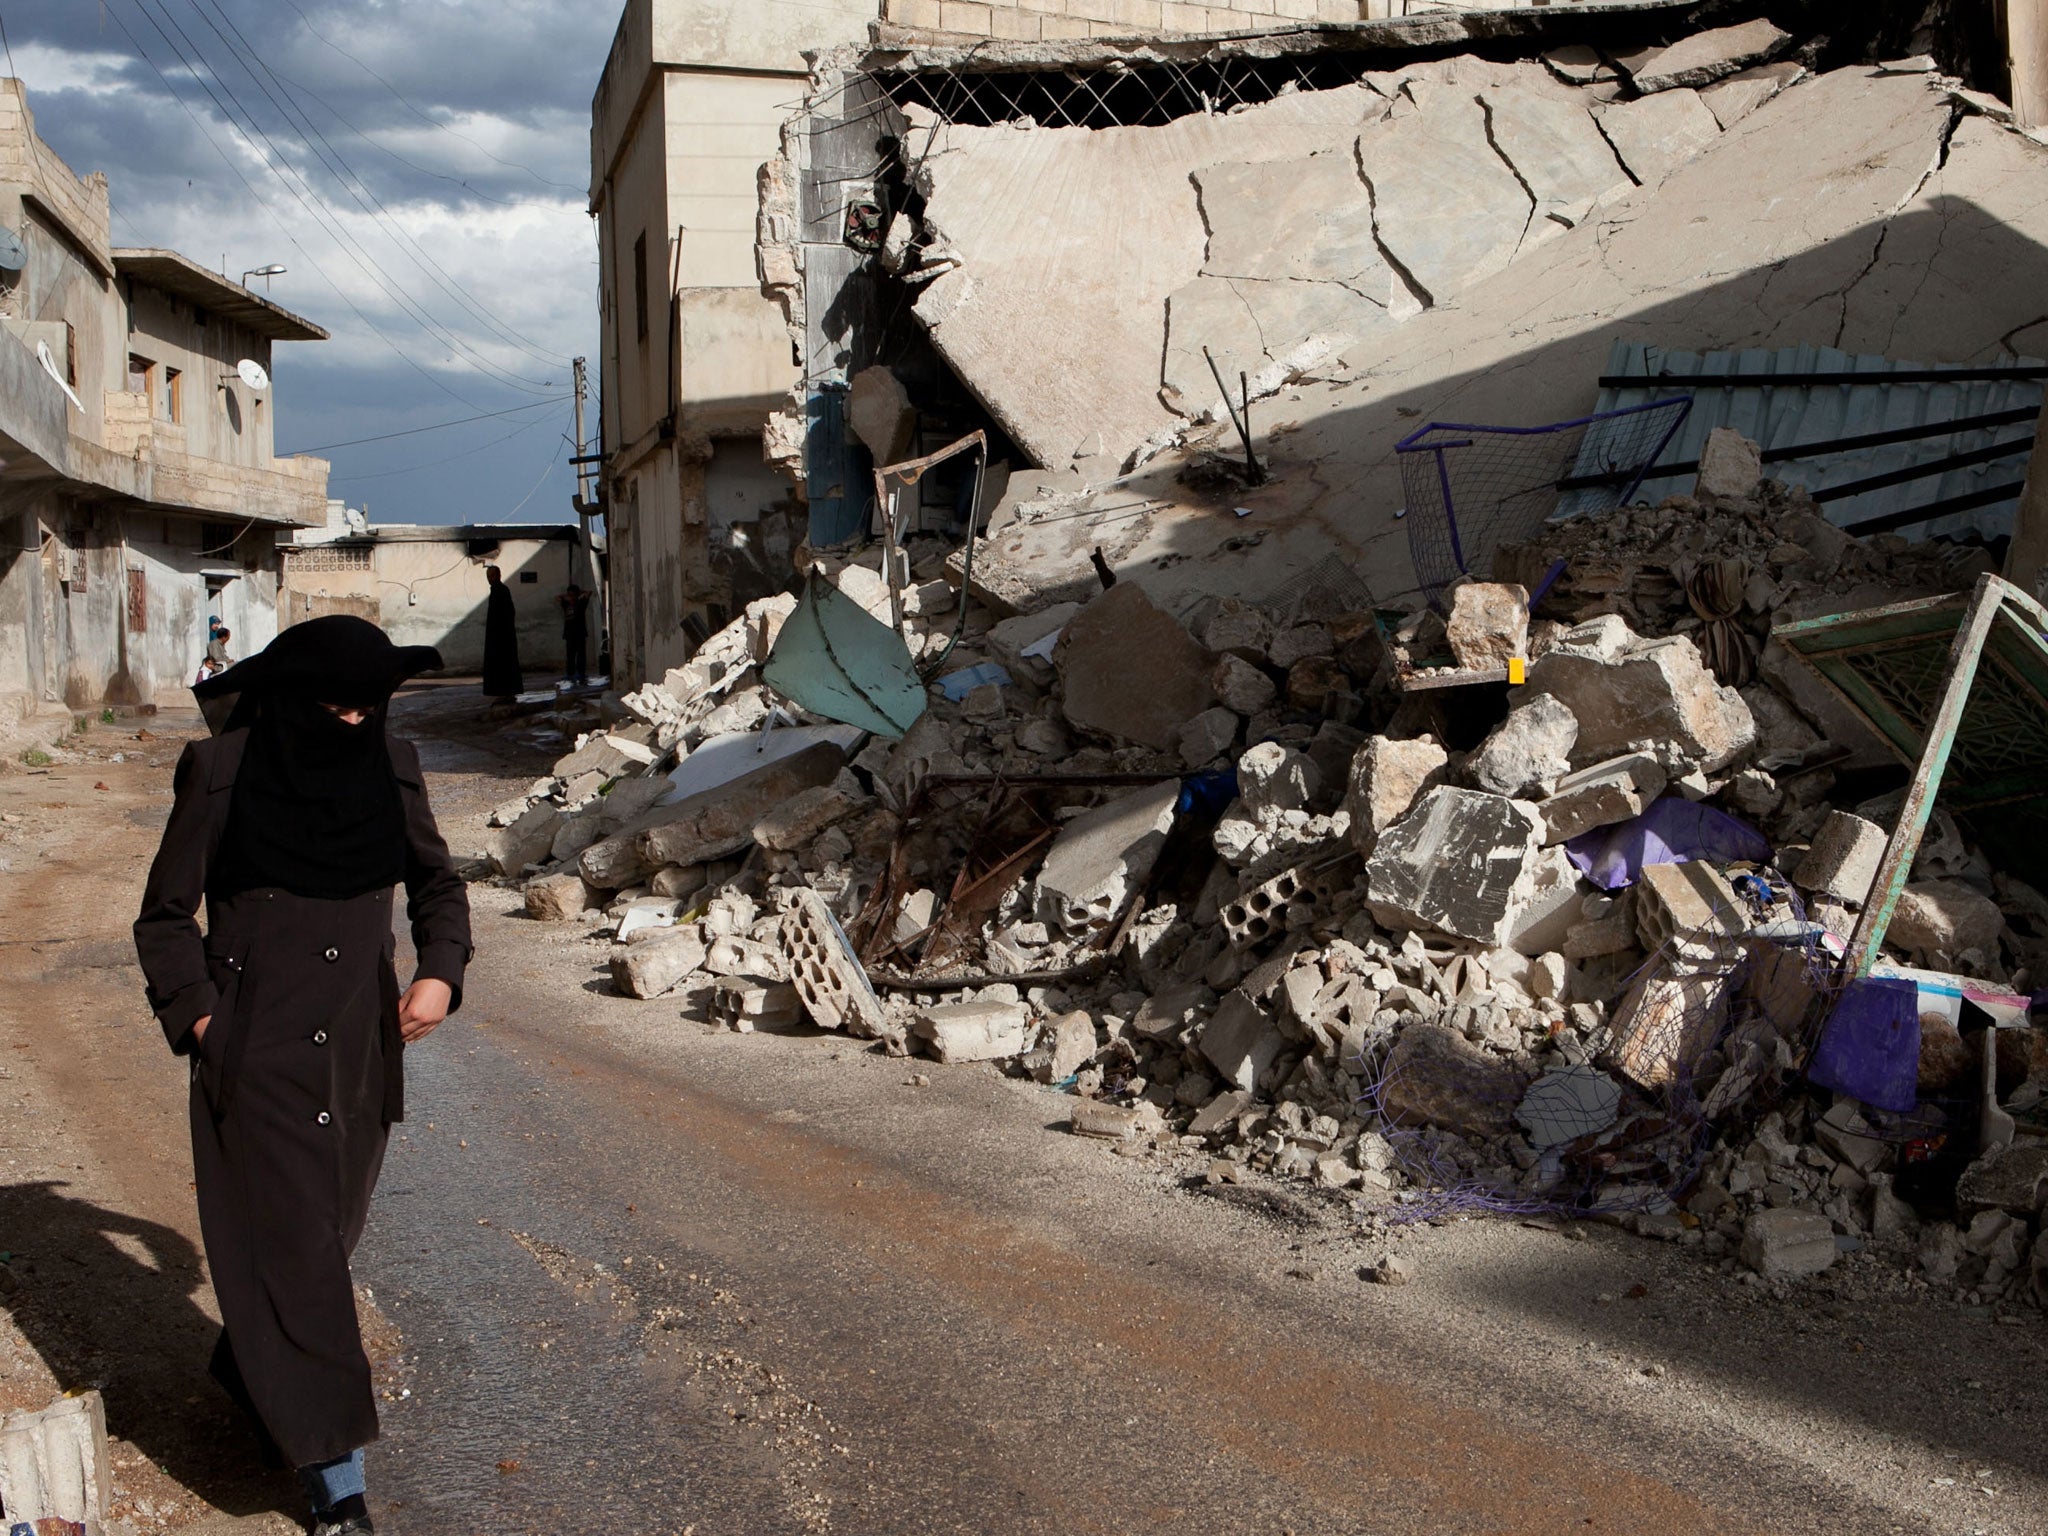 A Syrian woman walks past the rubble of homes allegedly destroyed during Syrian government army shelling in the town of Taftnaz, in northwestern Syria, on April 15, 2012.